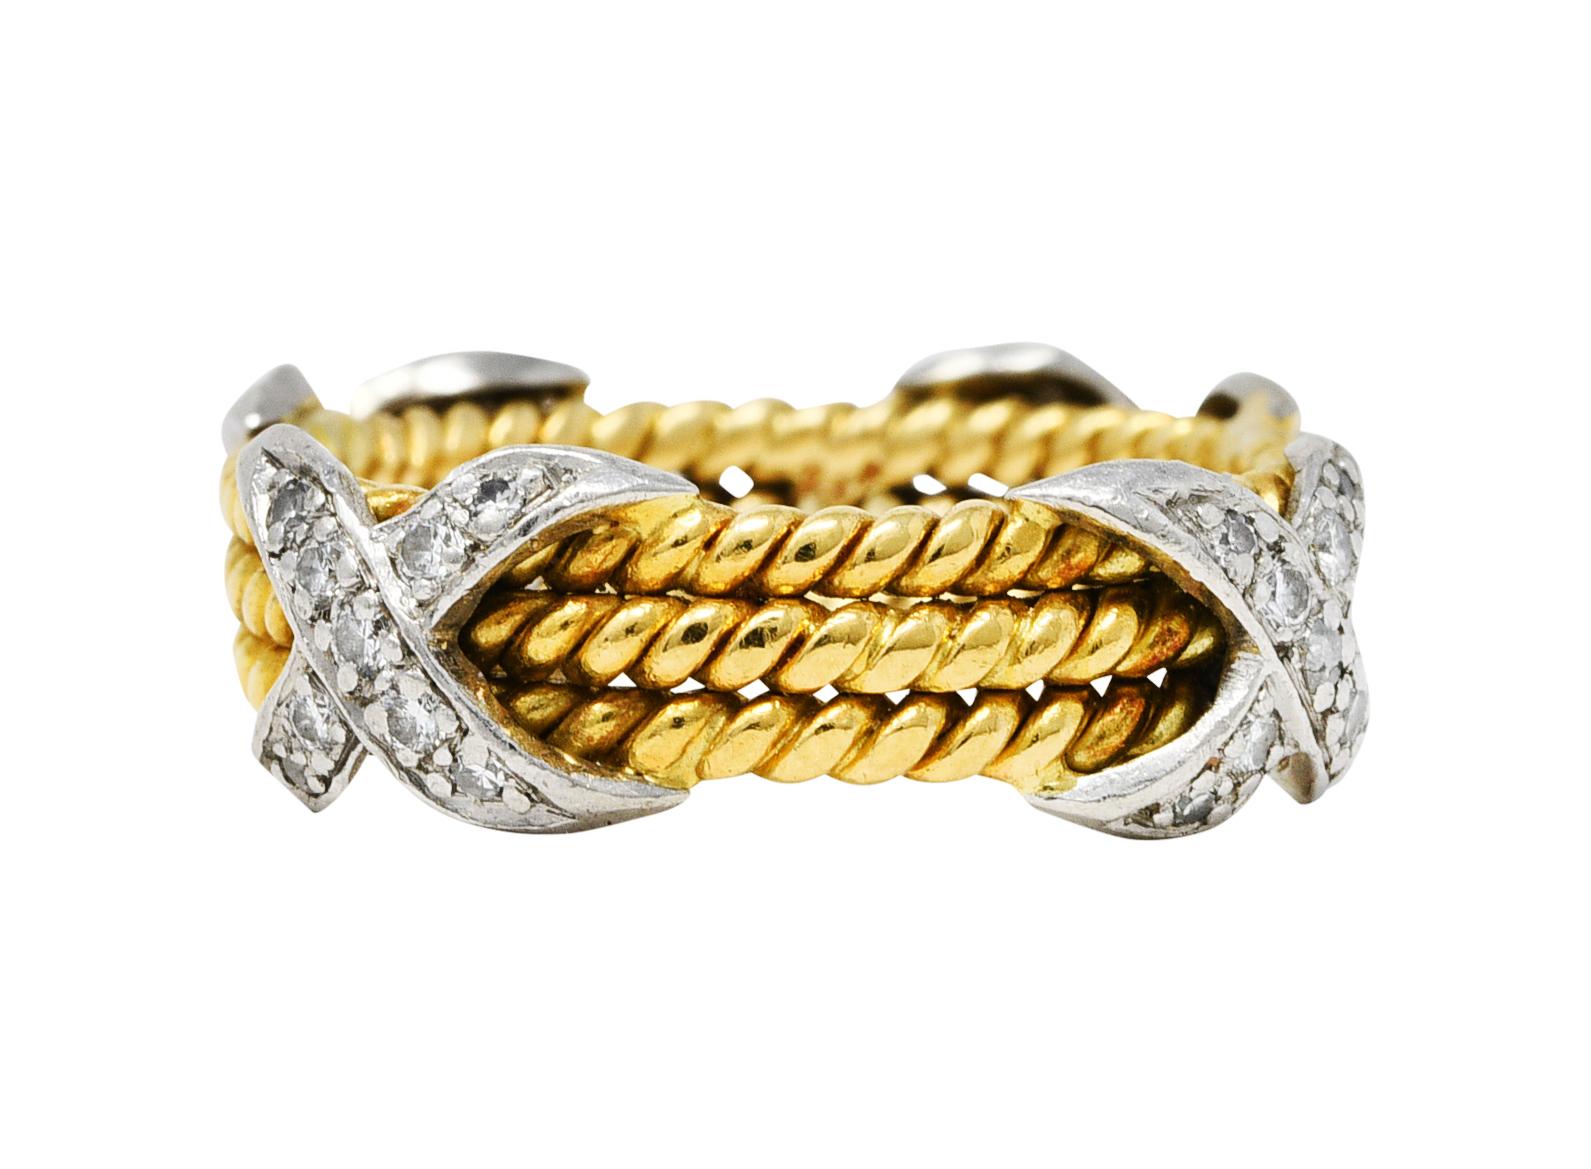 Band ring is comprised of three segments of gold twisted rope

With four platinum X stations - bead set with round brilliant cut diamonds

Weighing in total approximately 0.30 carat - eye clean and bright

Stamped 18K for 18 karat gold while Xs